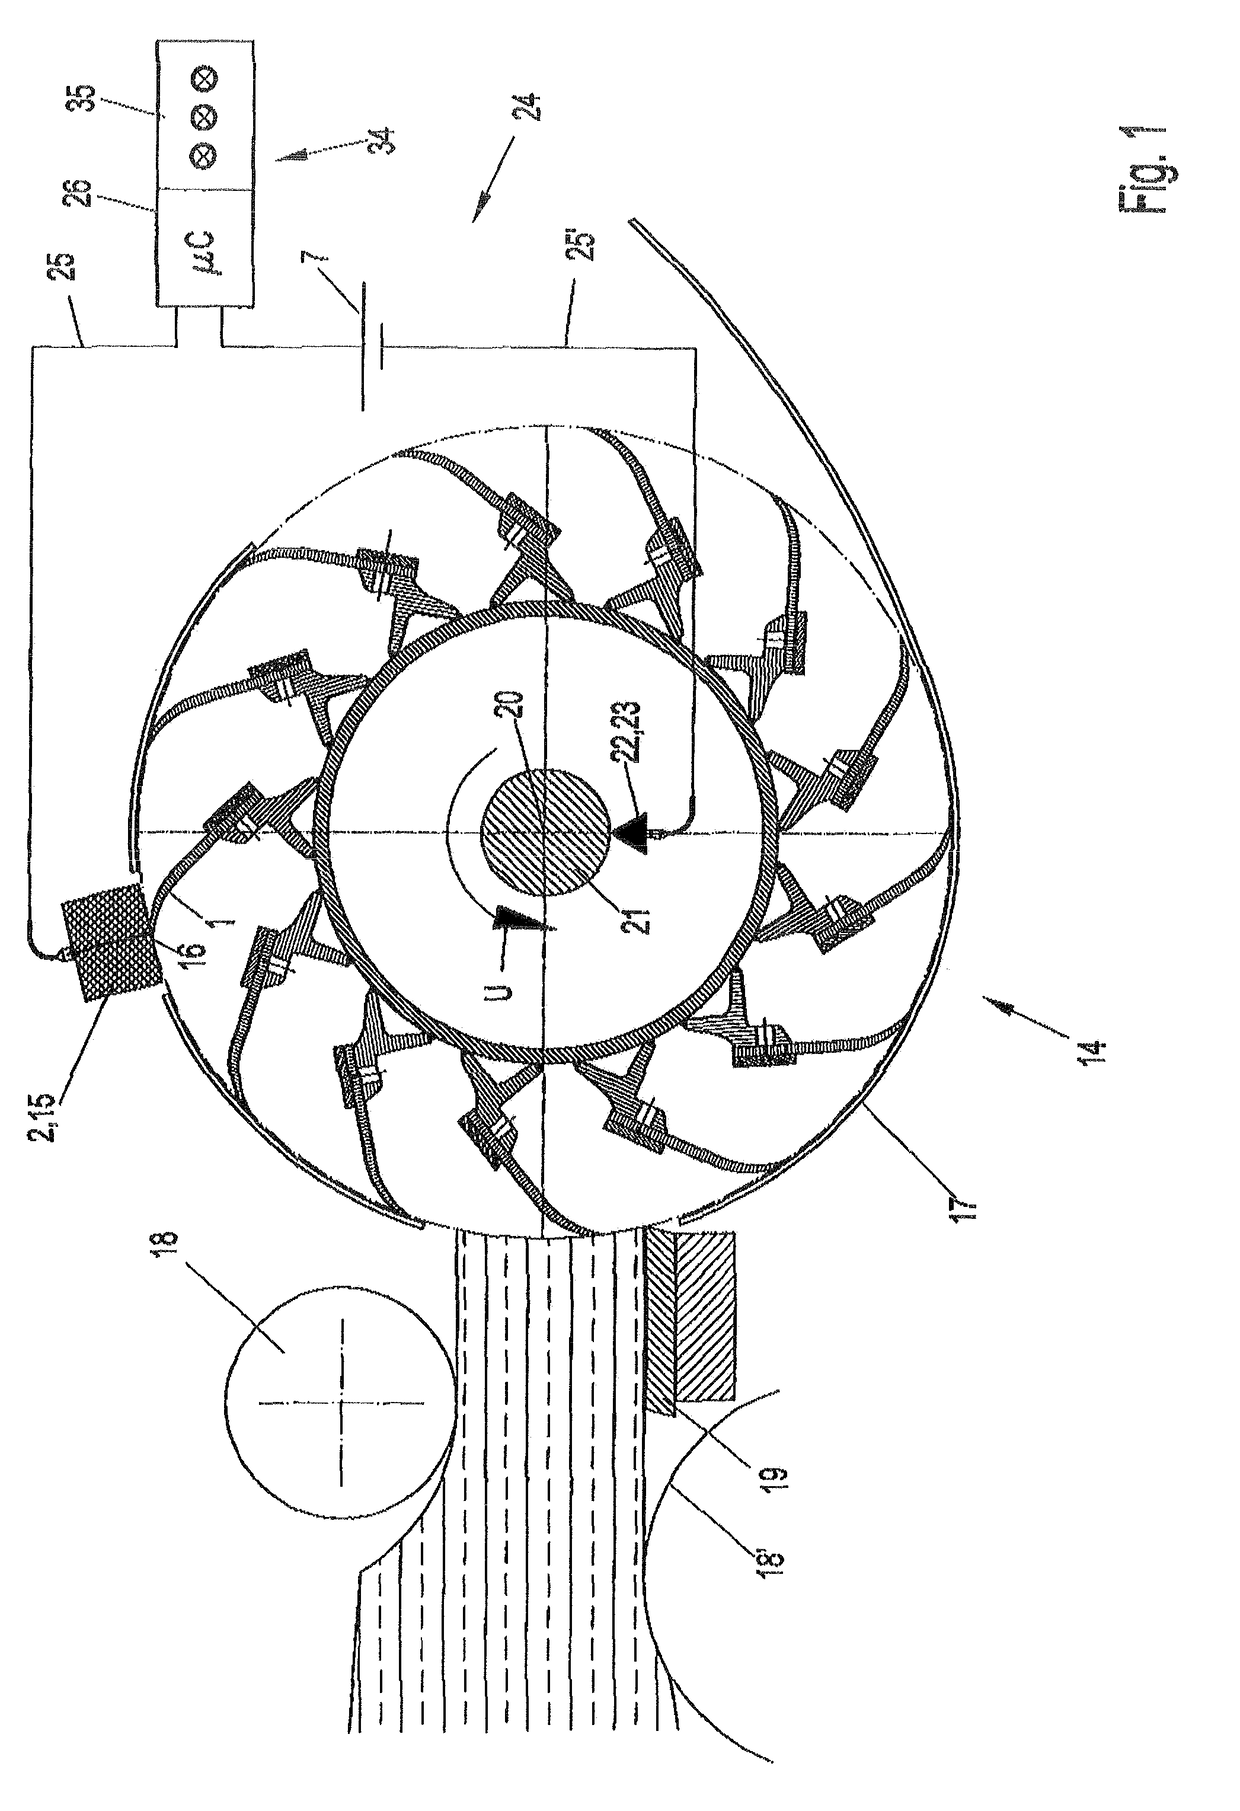 Method for determining the sharpness of cutting edges of chopper blades